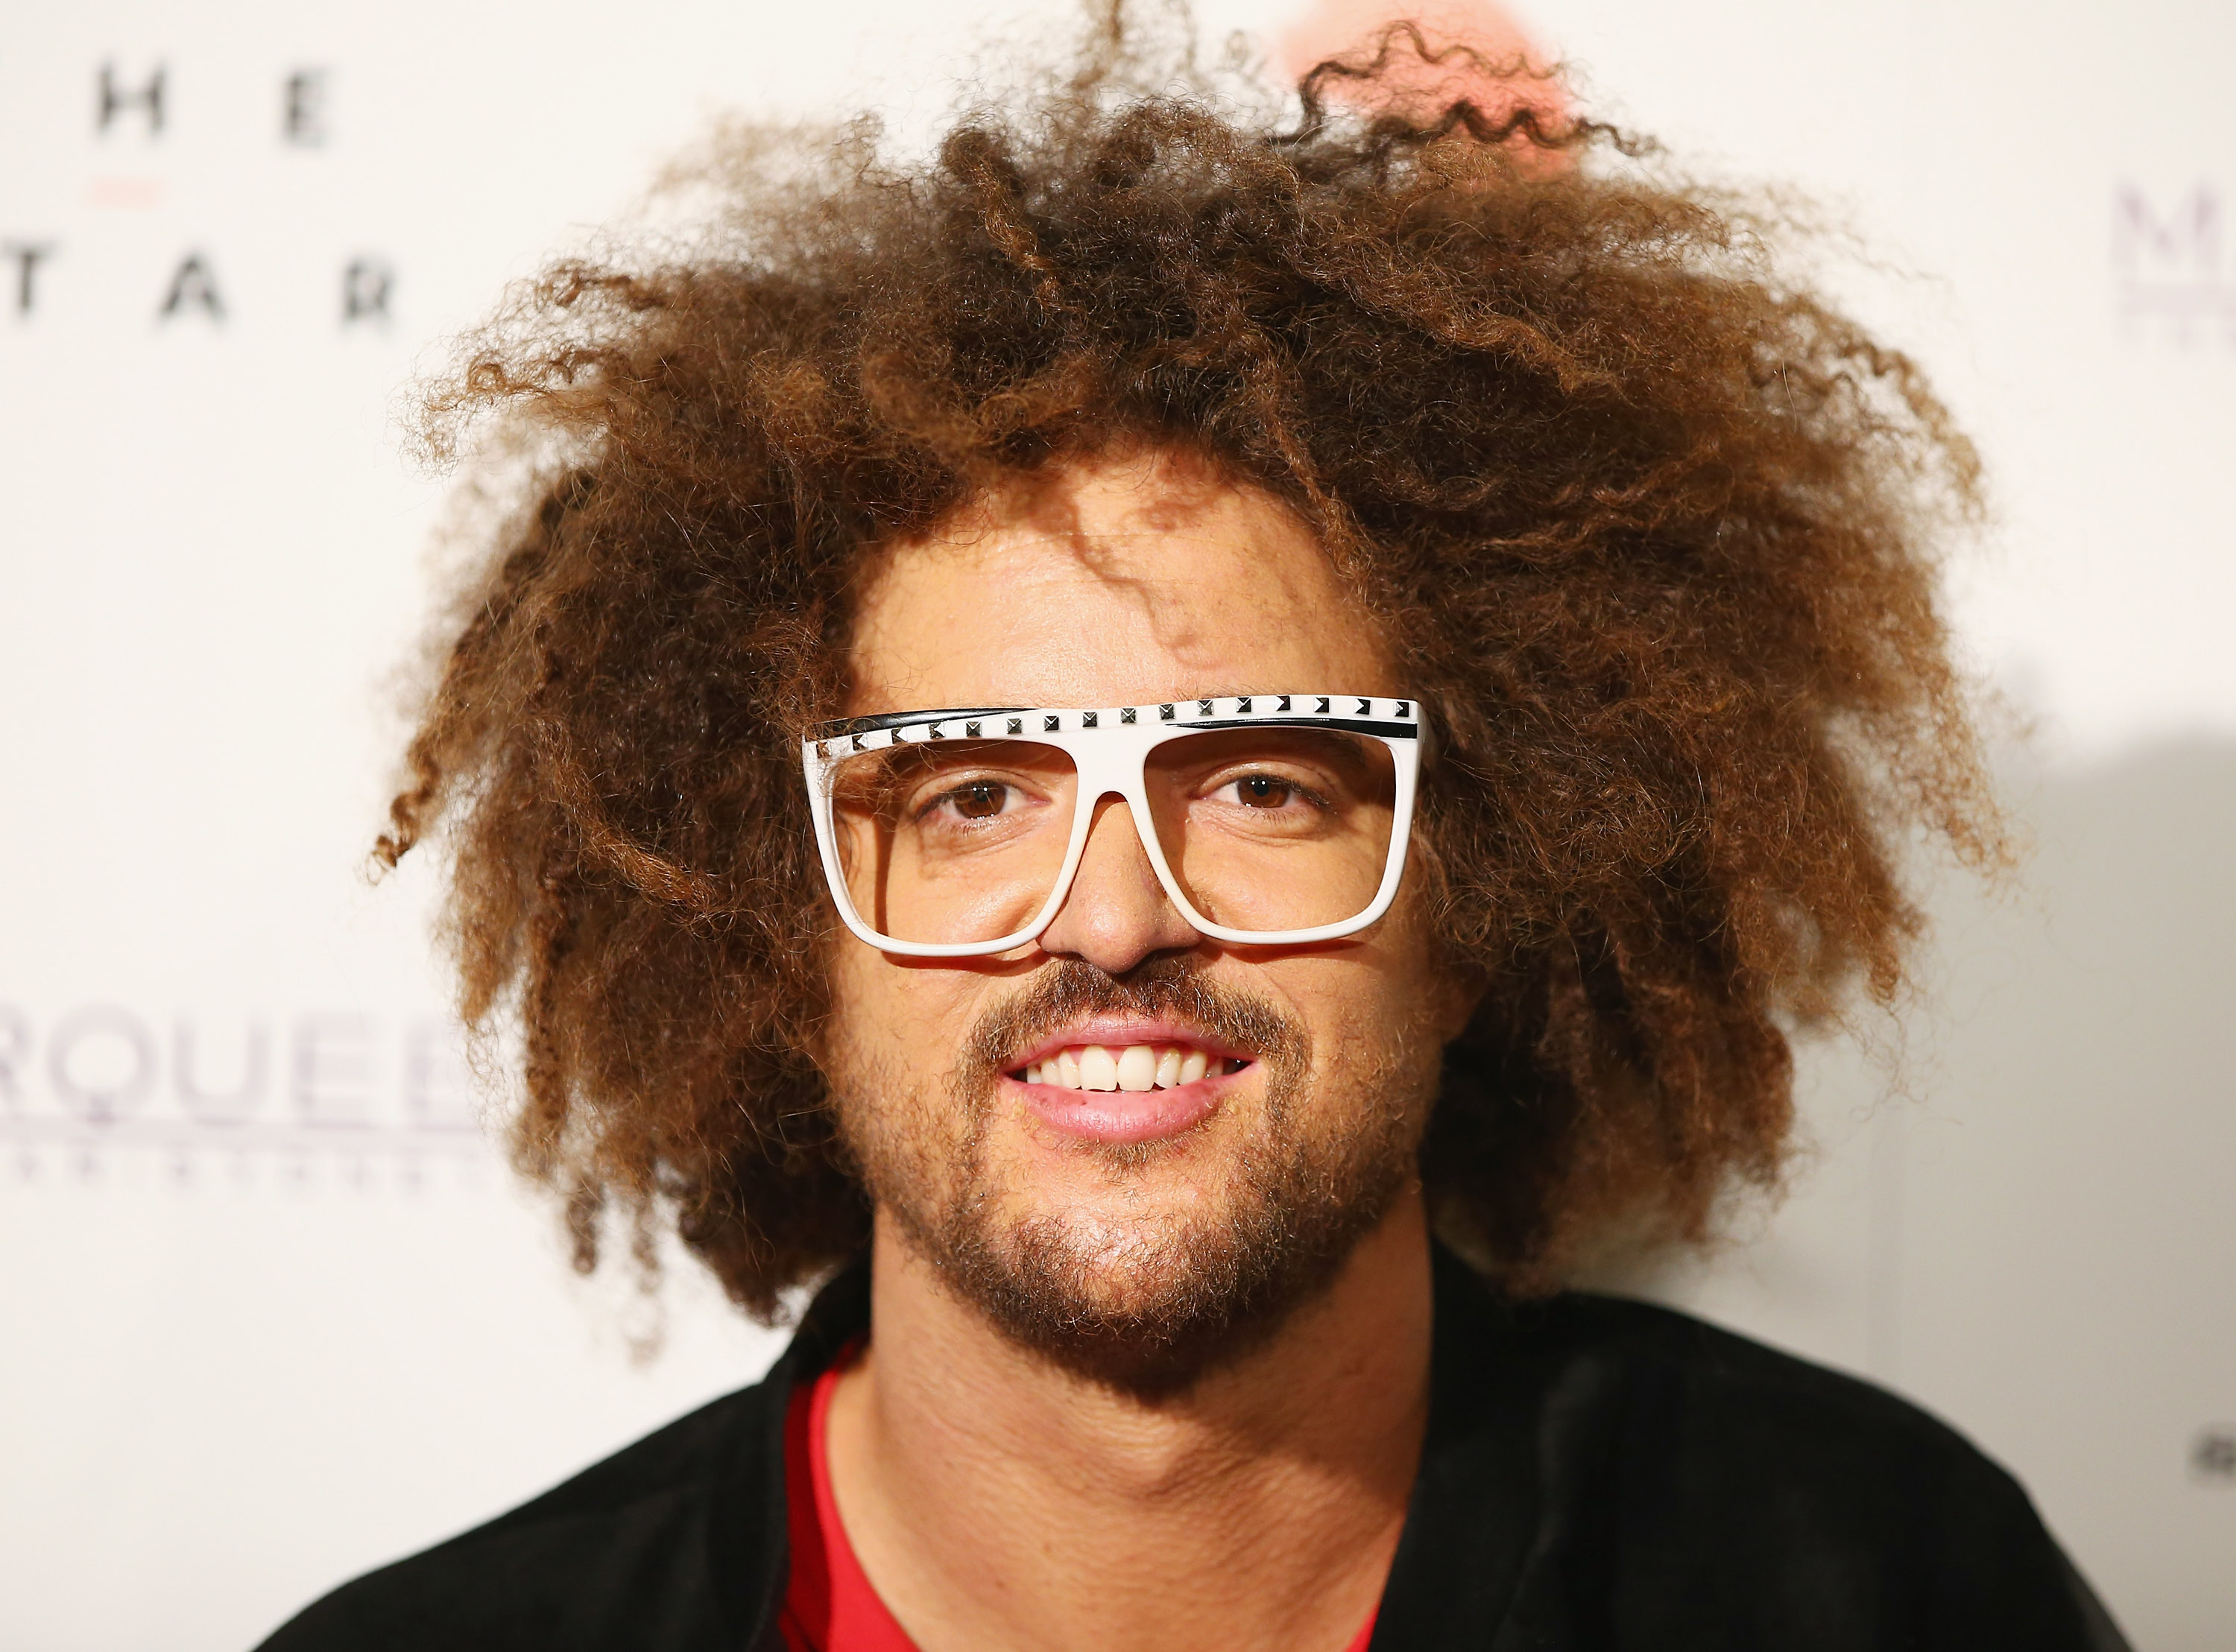 Redfoo poses at Marquee Nightclub on Aug. 12, 2014 in Sydney. (Don Arnold—WireImage)